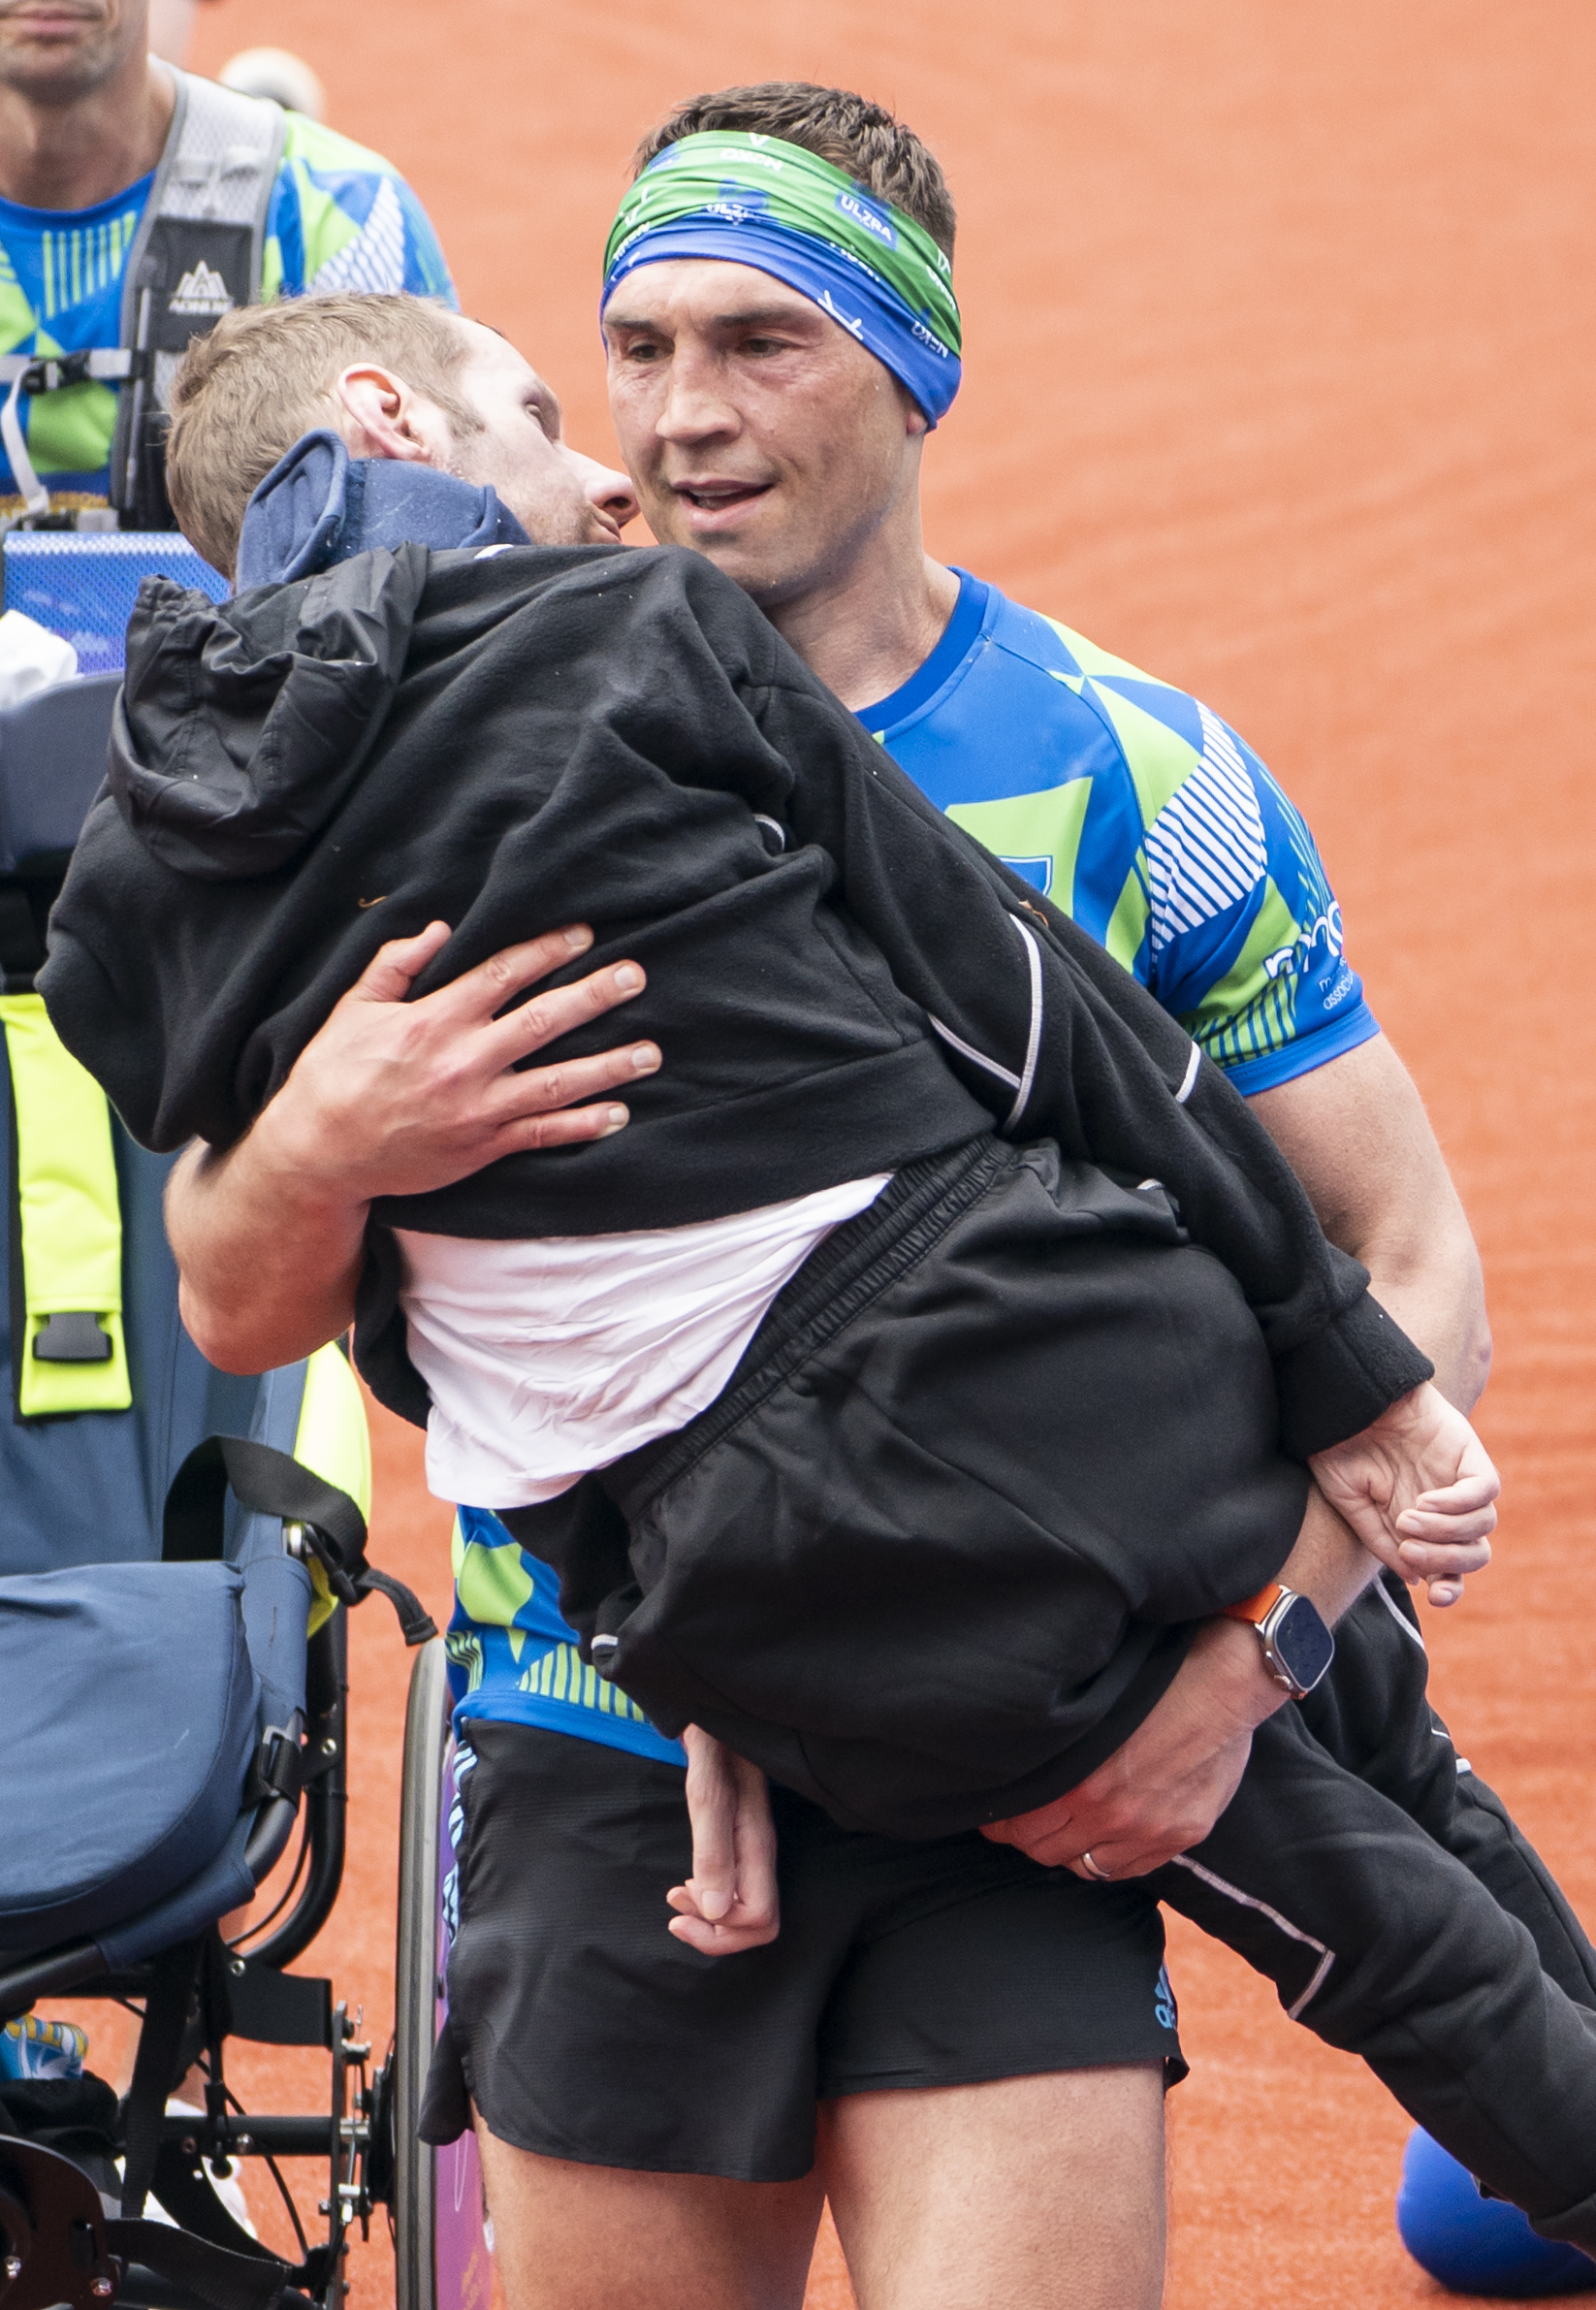 Emotional Kevin Sinfield carries Rob Burrow over finish line at Leeds Marathon